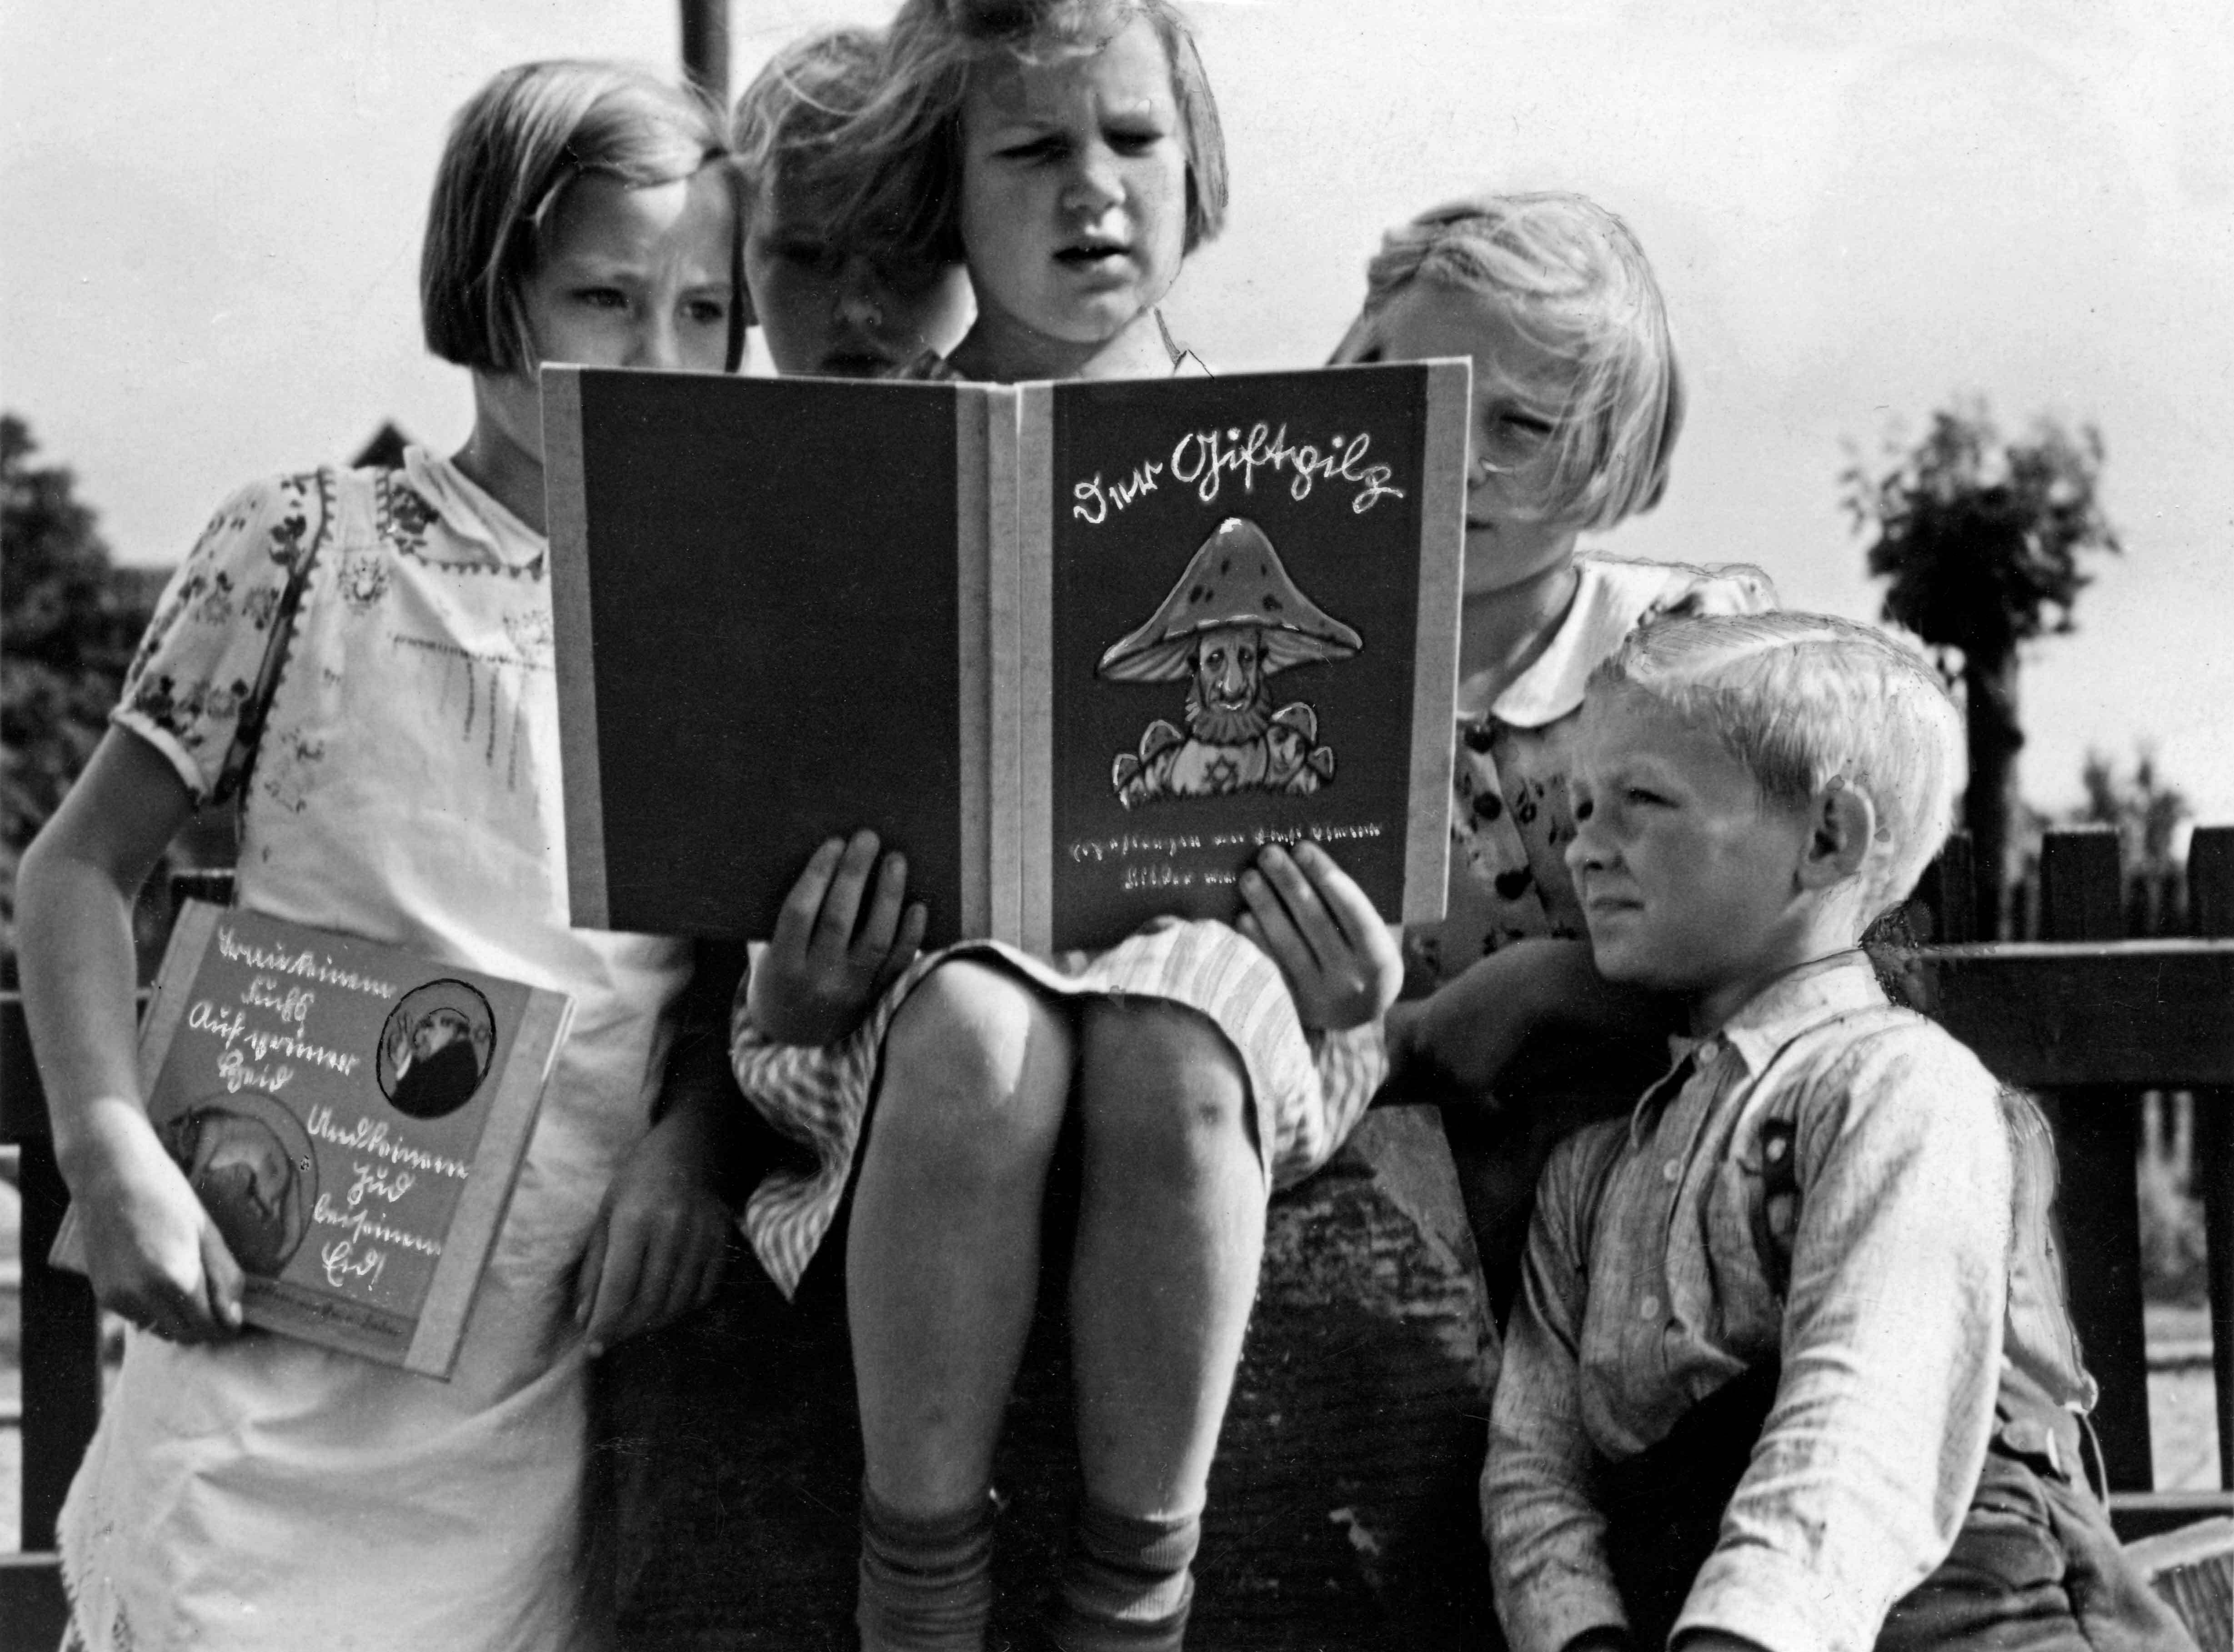 A group of children looking at a book with a cover featuring German lettering and a caricature of a face with a mushroom hat.